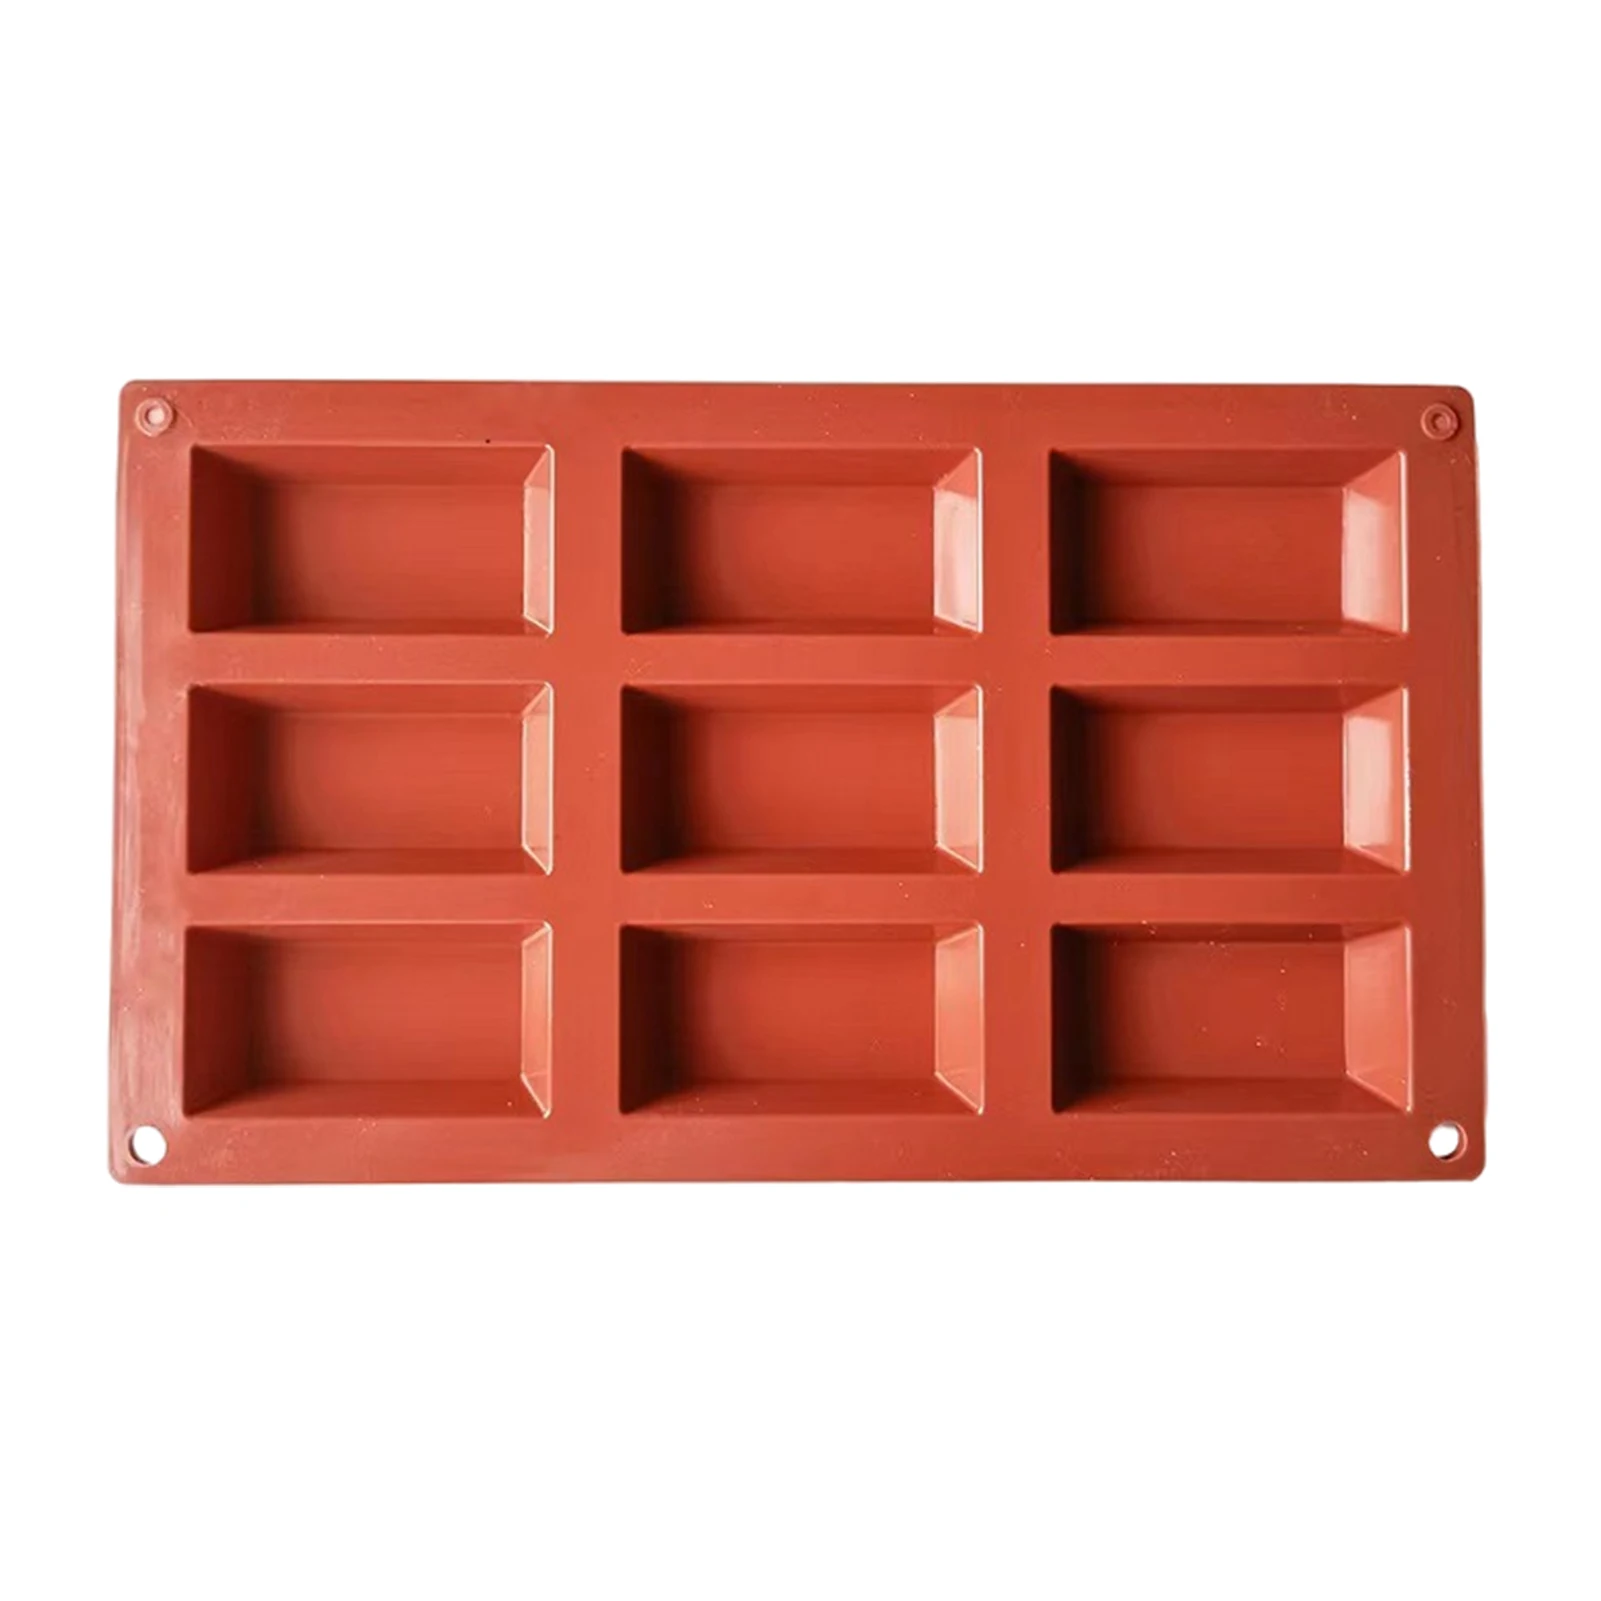 

9-Cavity Silicone Mold Financier Cake Baking Moulds Mini Loaf Pan Baking Mold For Bread Meatloaf Brownie Cornbread Muffin